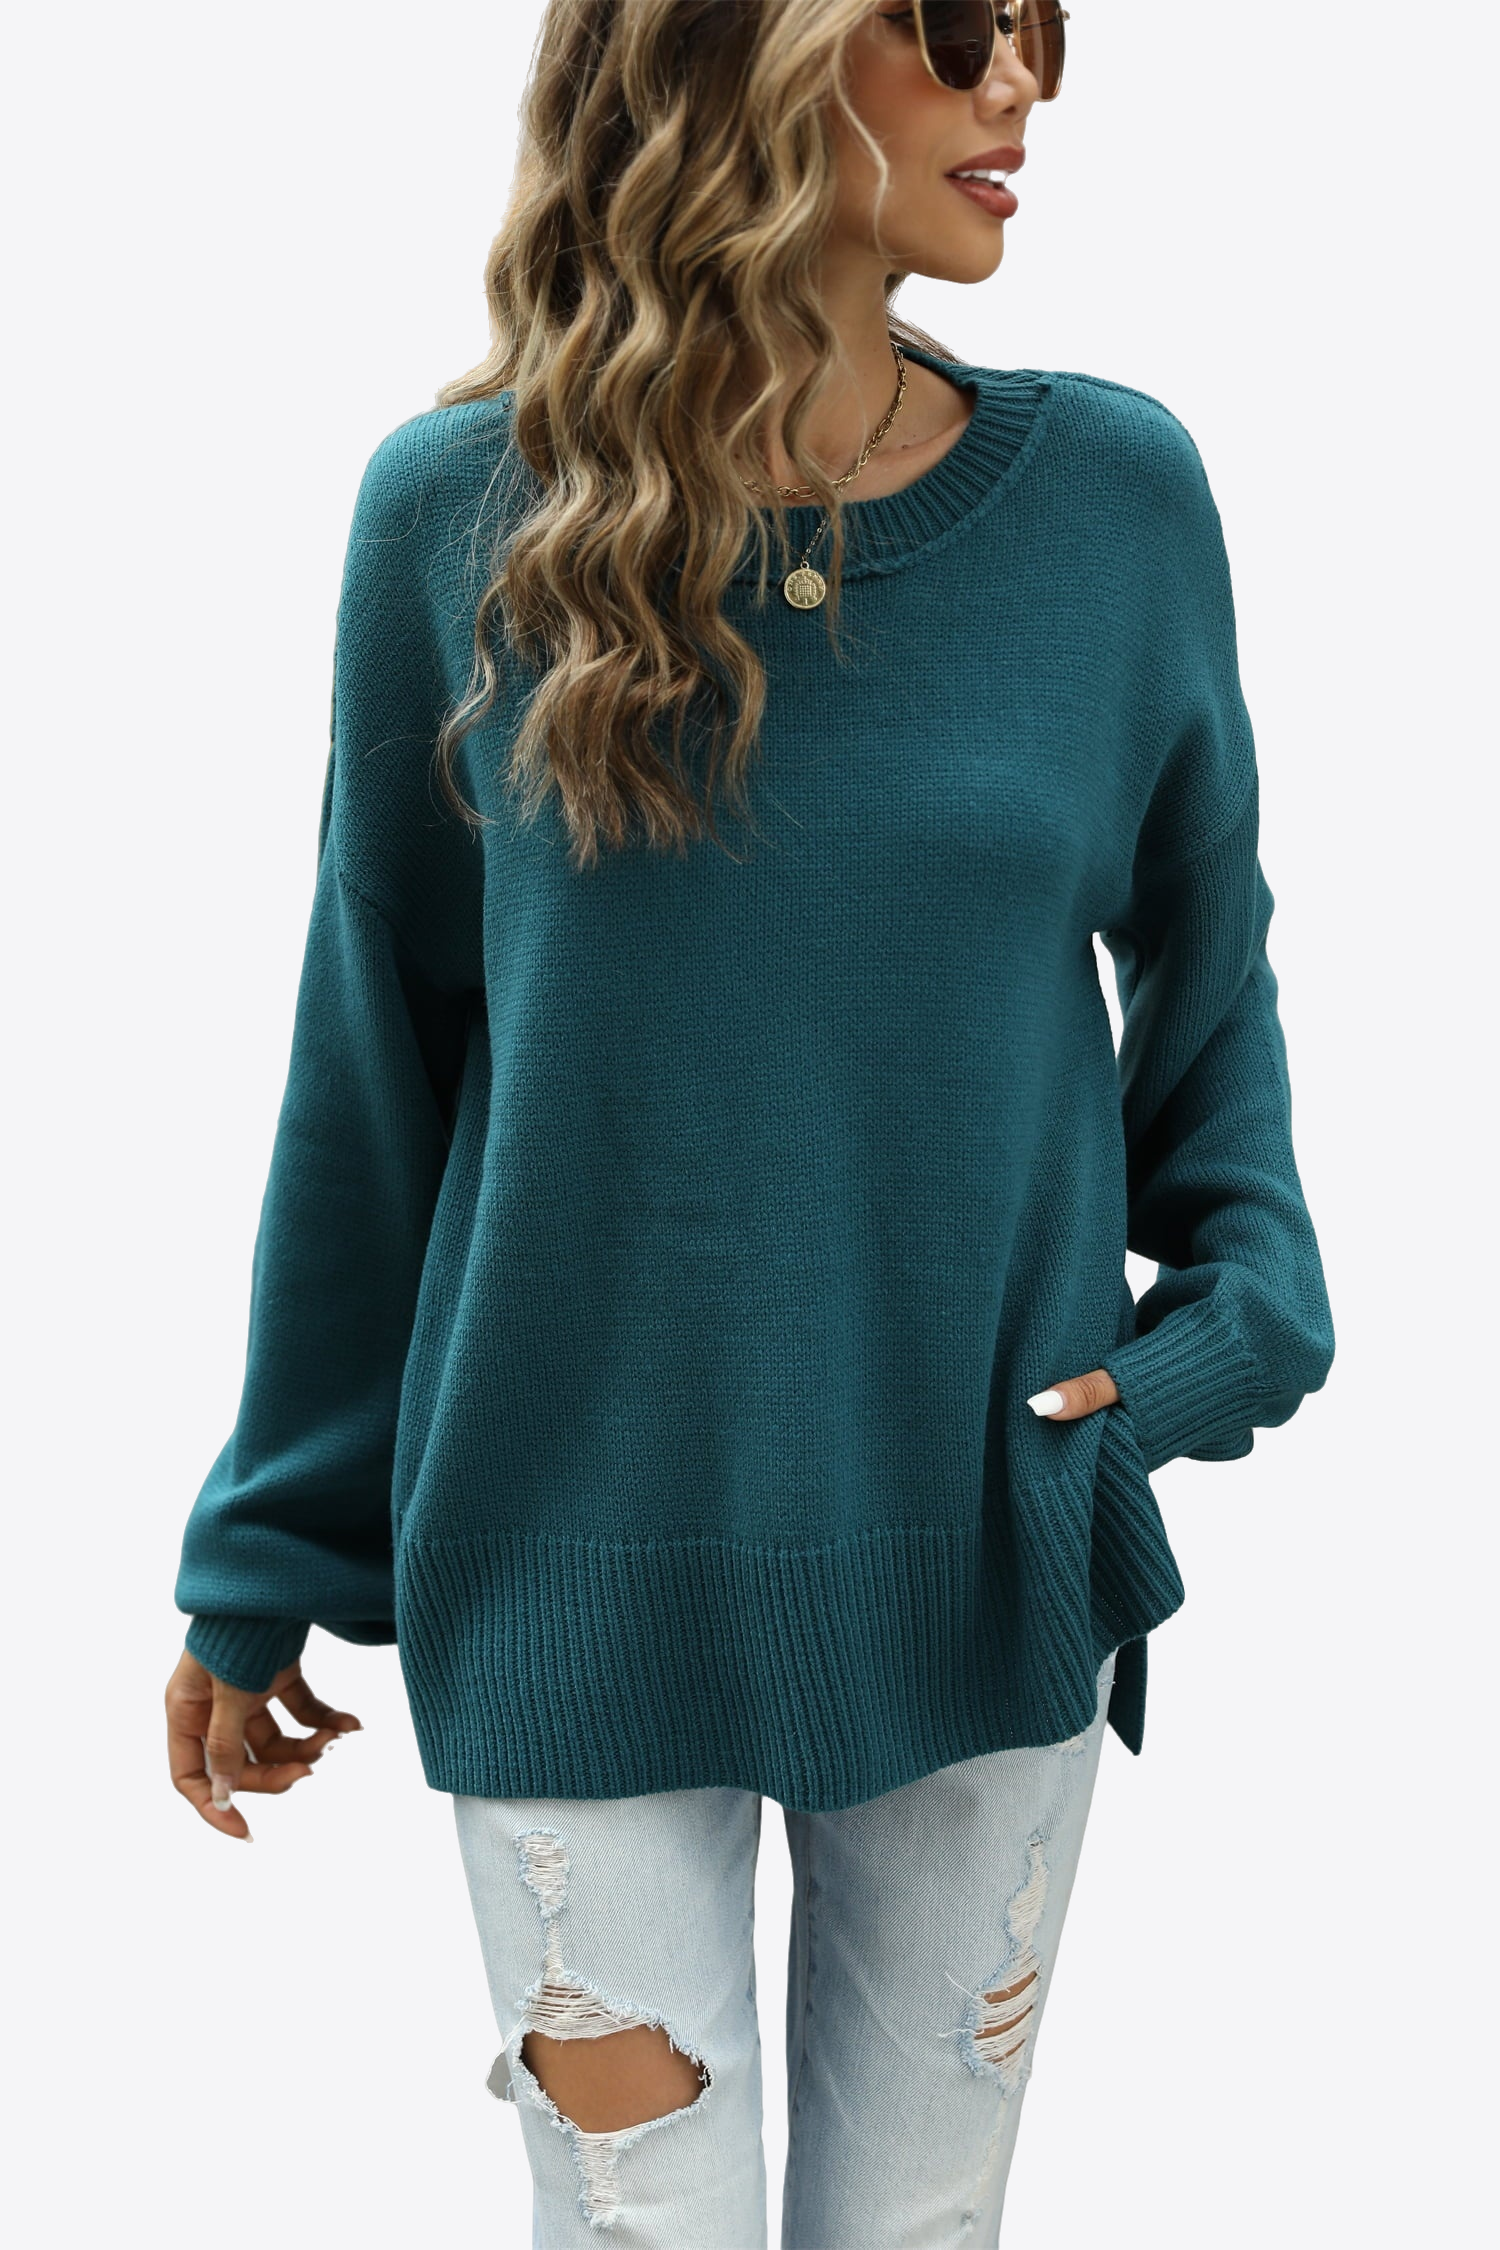 Oceanic Orchard Round Neck Dropped Shoulder Sweater | Hypoallergenic - Allergy Friendly - Naturally Free